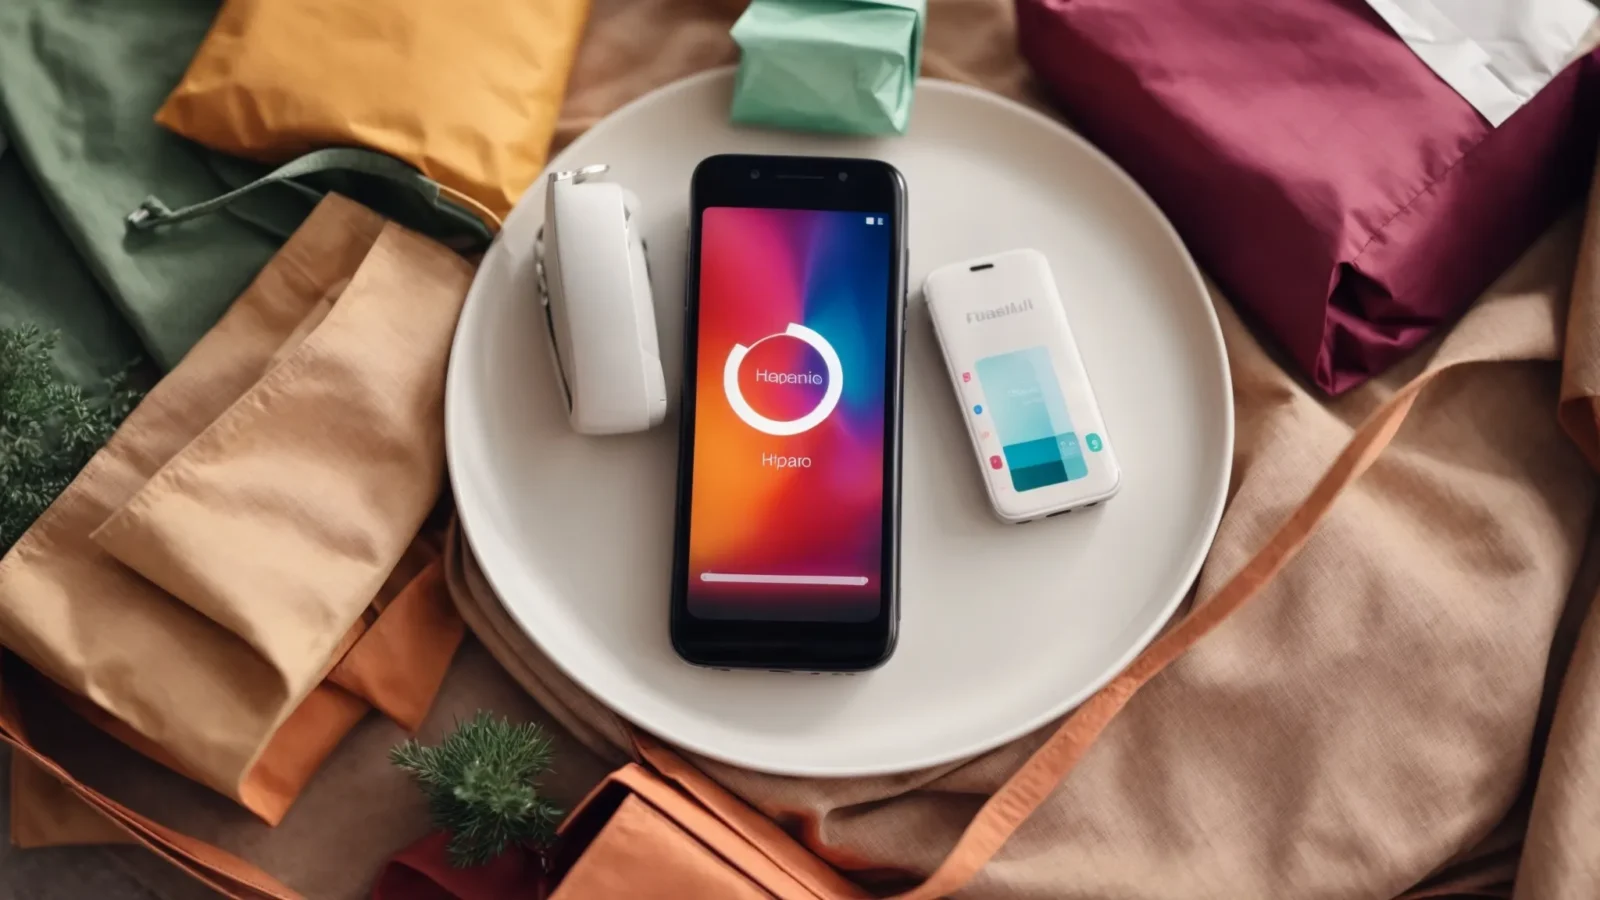 a smartphone displaying a colorful shopping app interface rests on a table, surrounded by shopping bags.